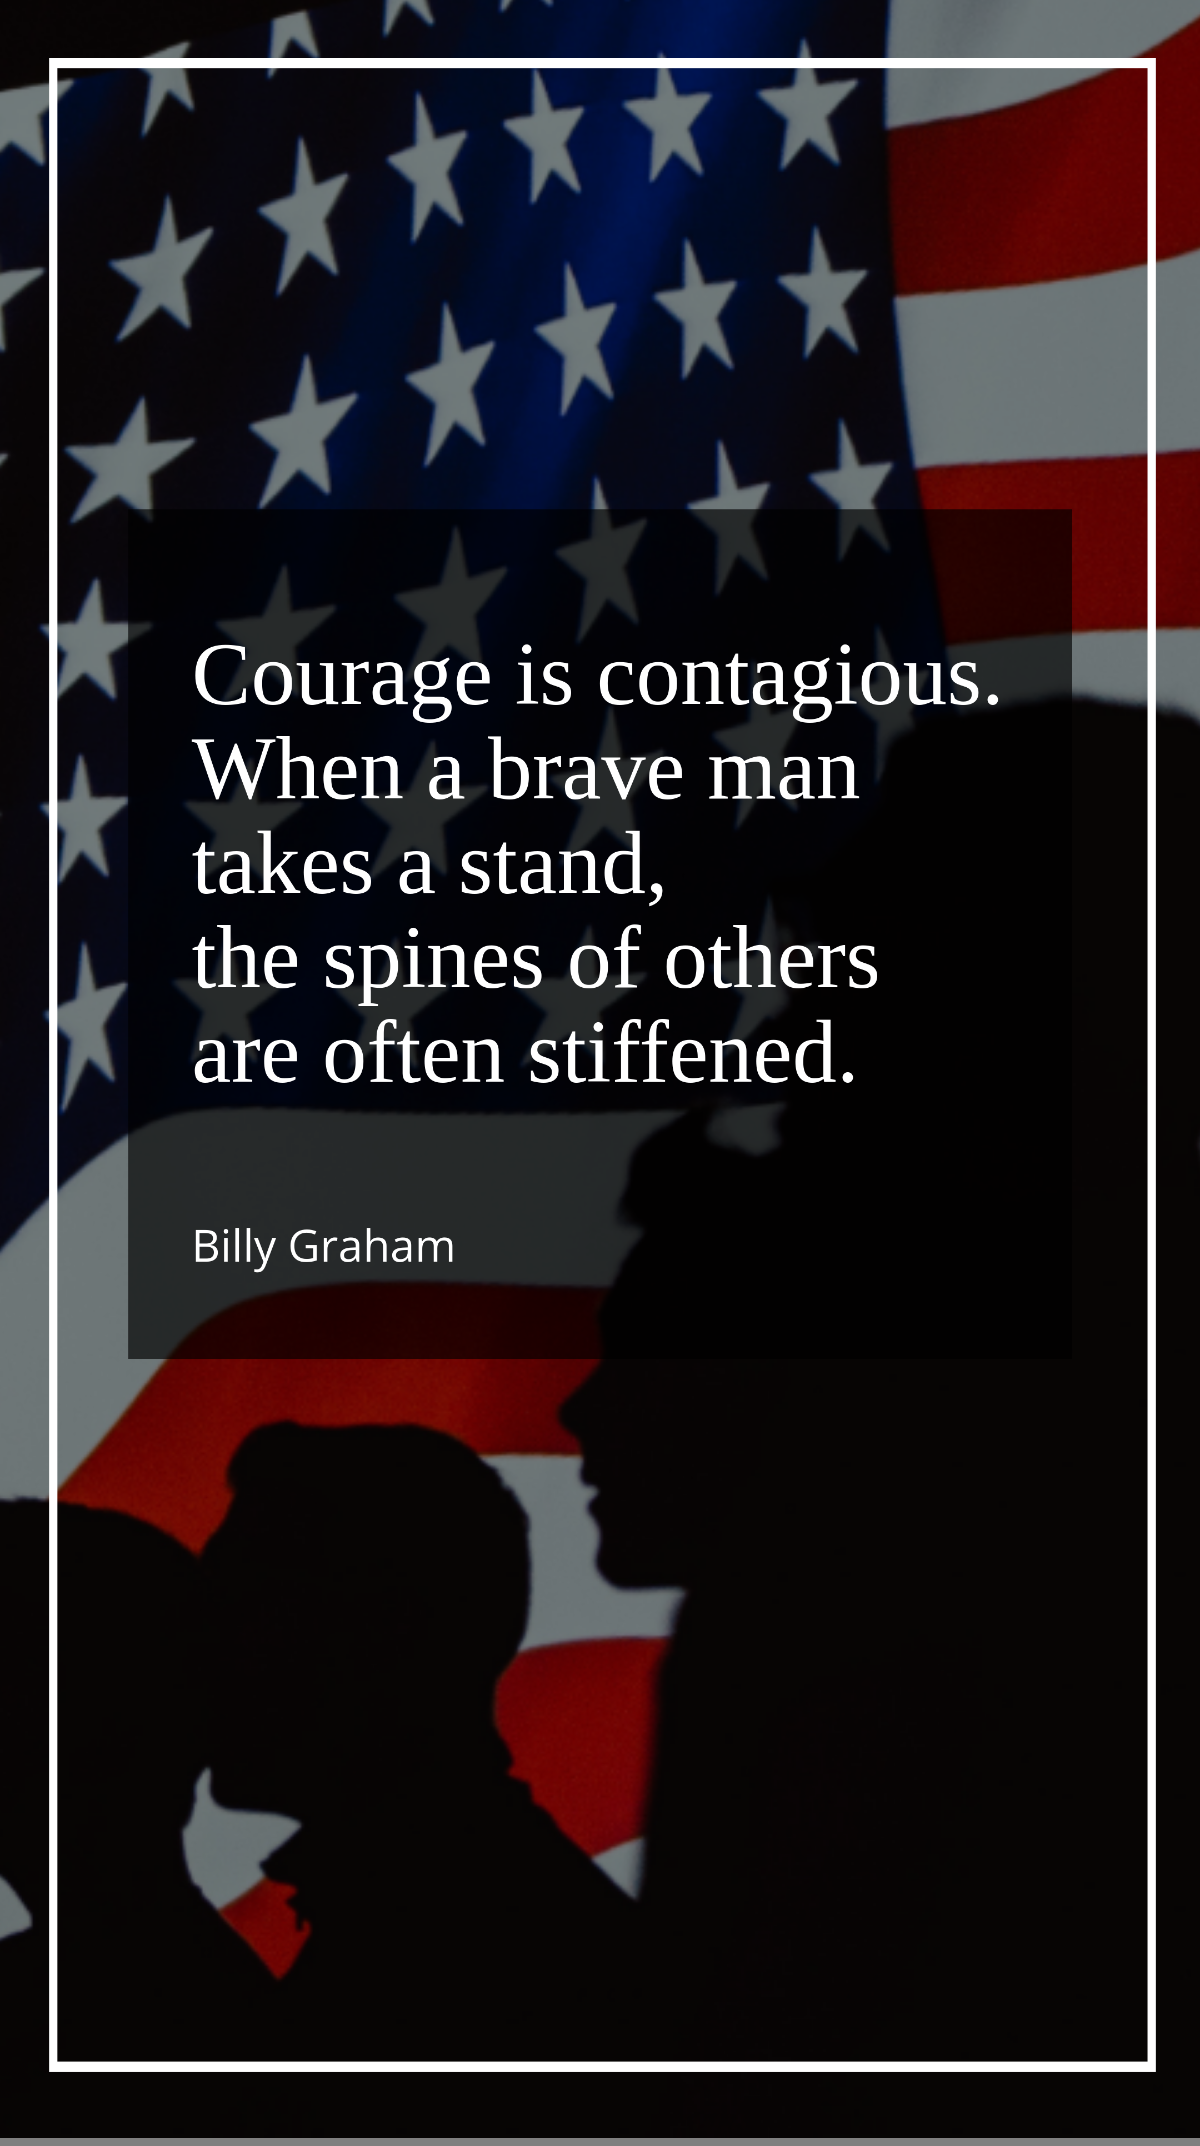 Free  Billy Graham - Courage is contagious. When a brave man takes a stand, the spines of others are often stiffened. Template